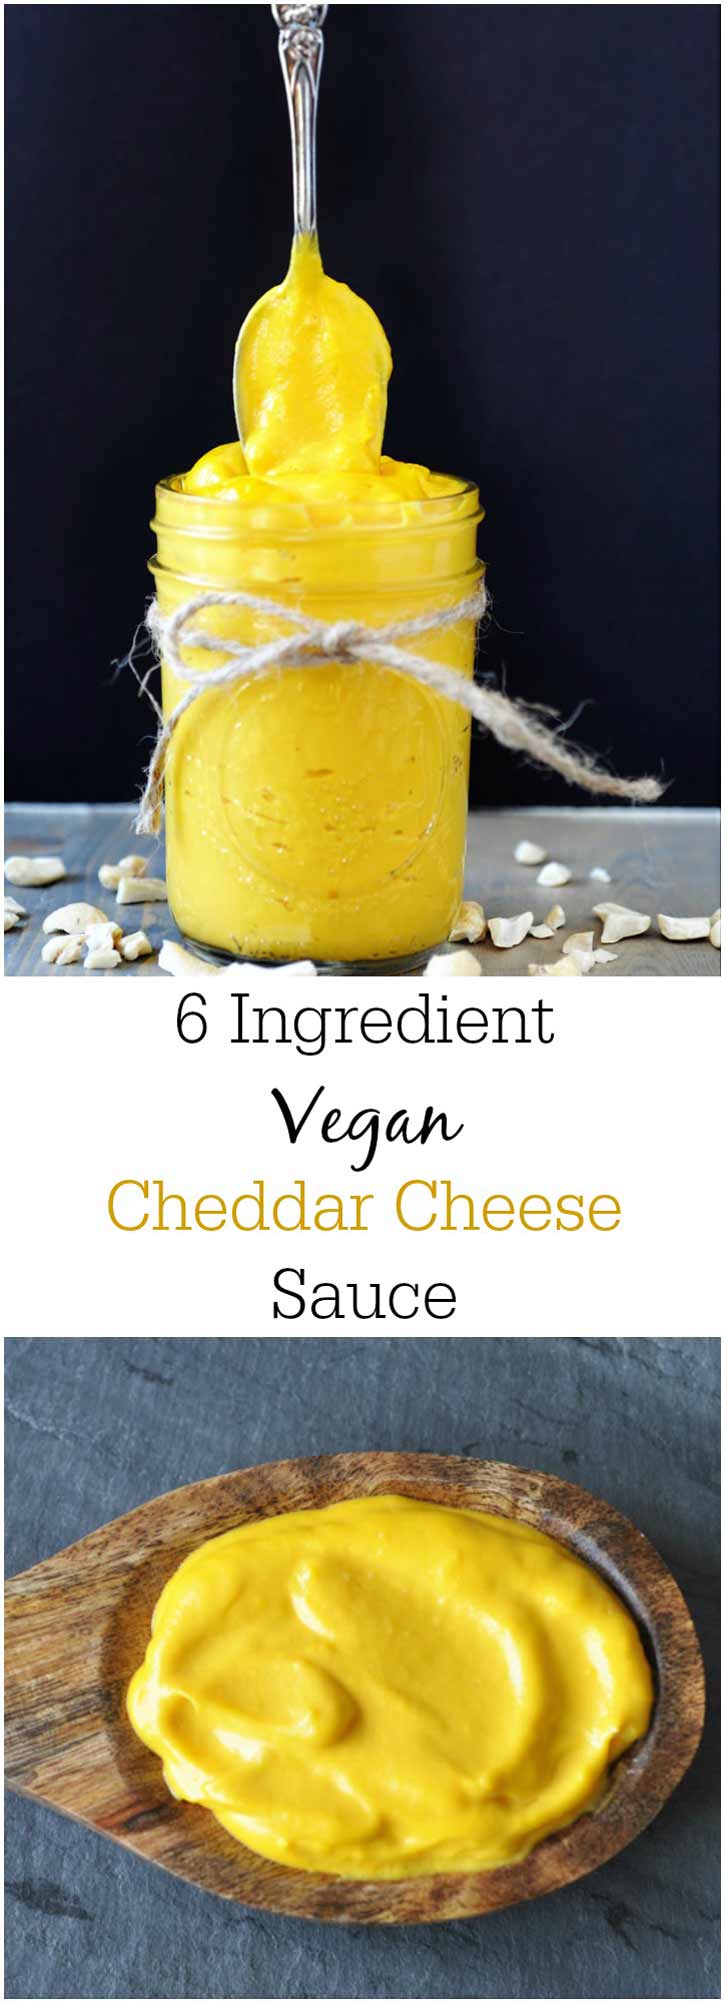 A Pinterest pin for a vegan cheddar cheese sauce with 2 pictures of the sauce, one with the sauce in a mason jar and one with the sauce on a wooden spoon.